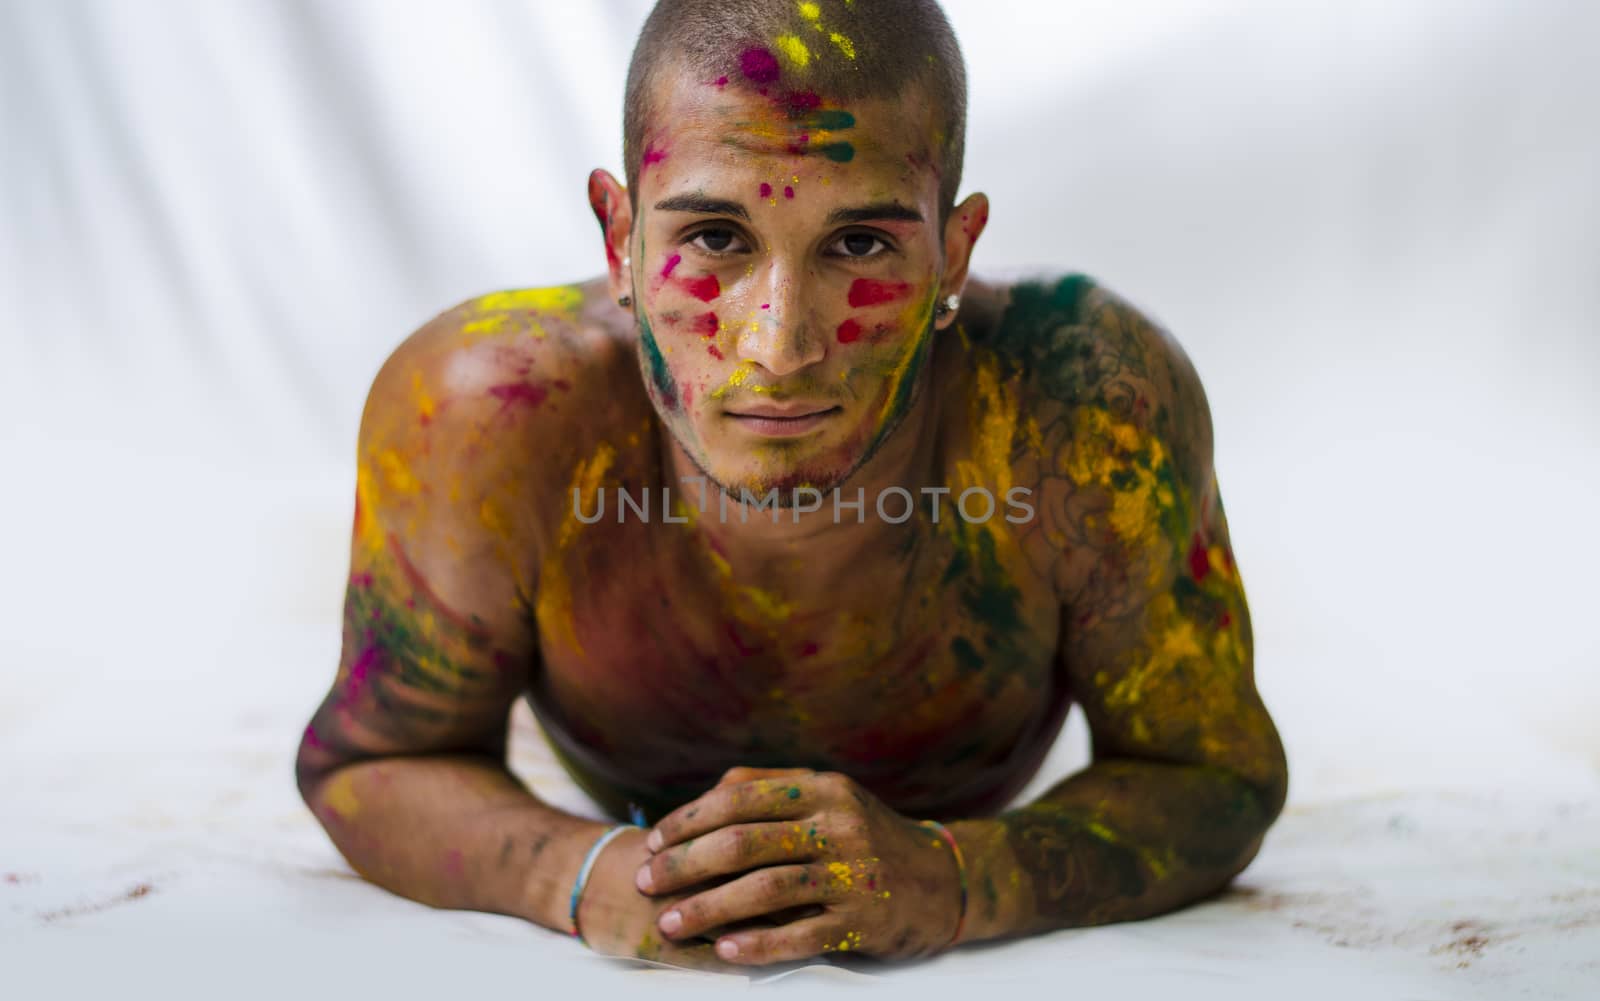 Attractive young man shirtless, skin painted all over with bright Holi colors, looking at camera, laying on the floor on white background